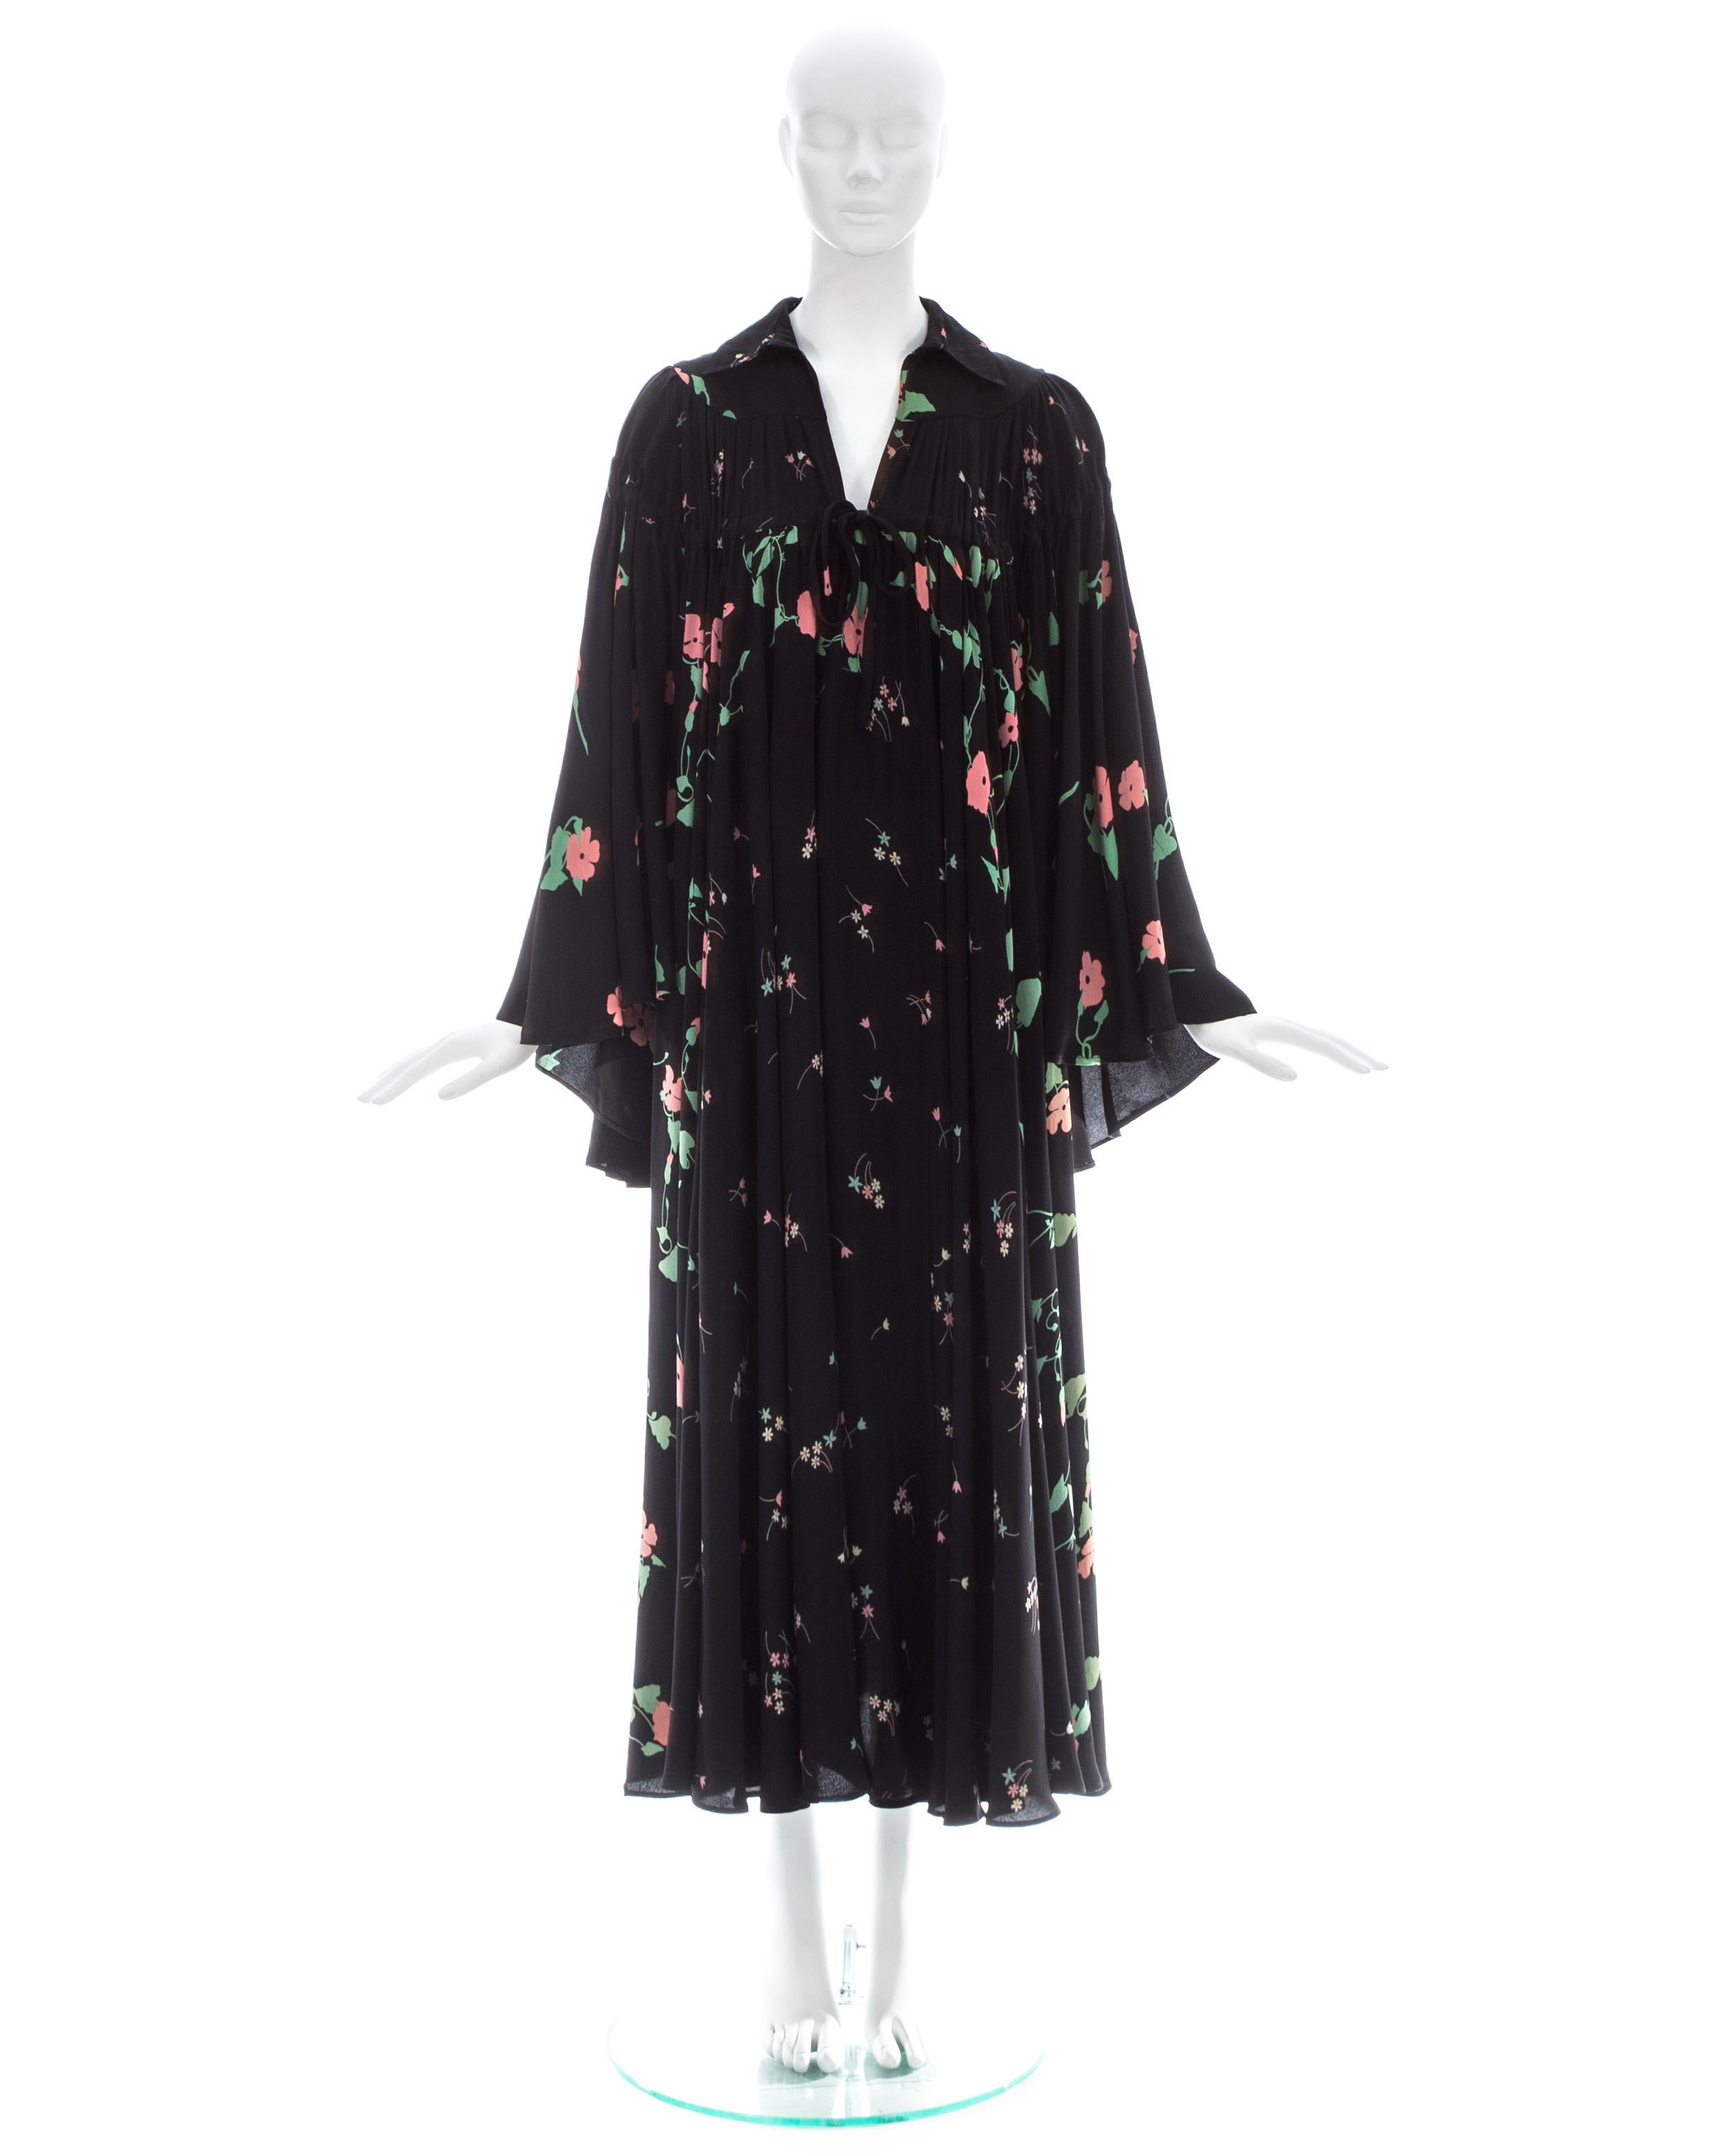 Ossie Clark; Black silk bell sleeve dress with 'Busy Lizzie' print by Celia Birtwell and drawstring fastening on yoke 

Spring-Summer 1971